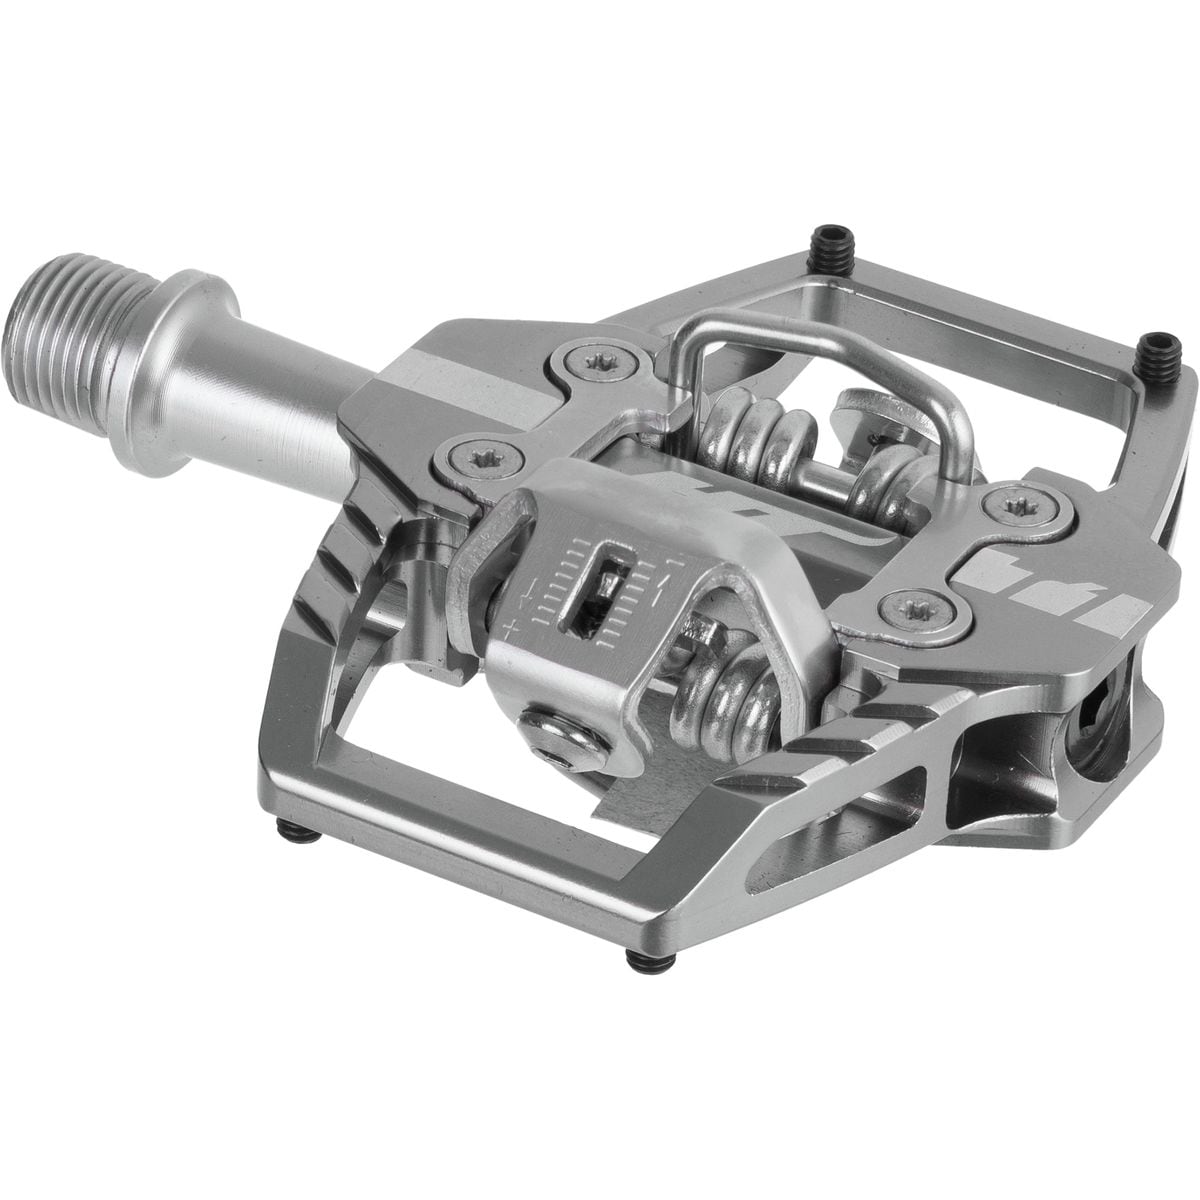 HT Components T1 Clipless Pedal